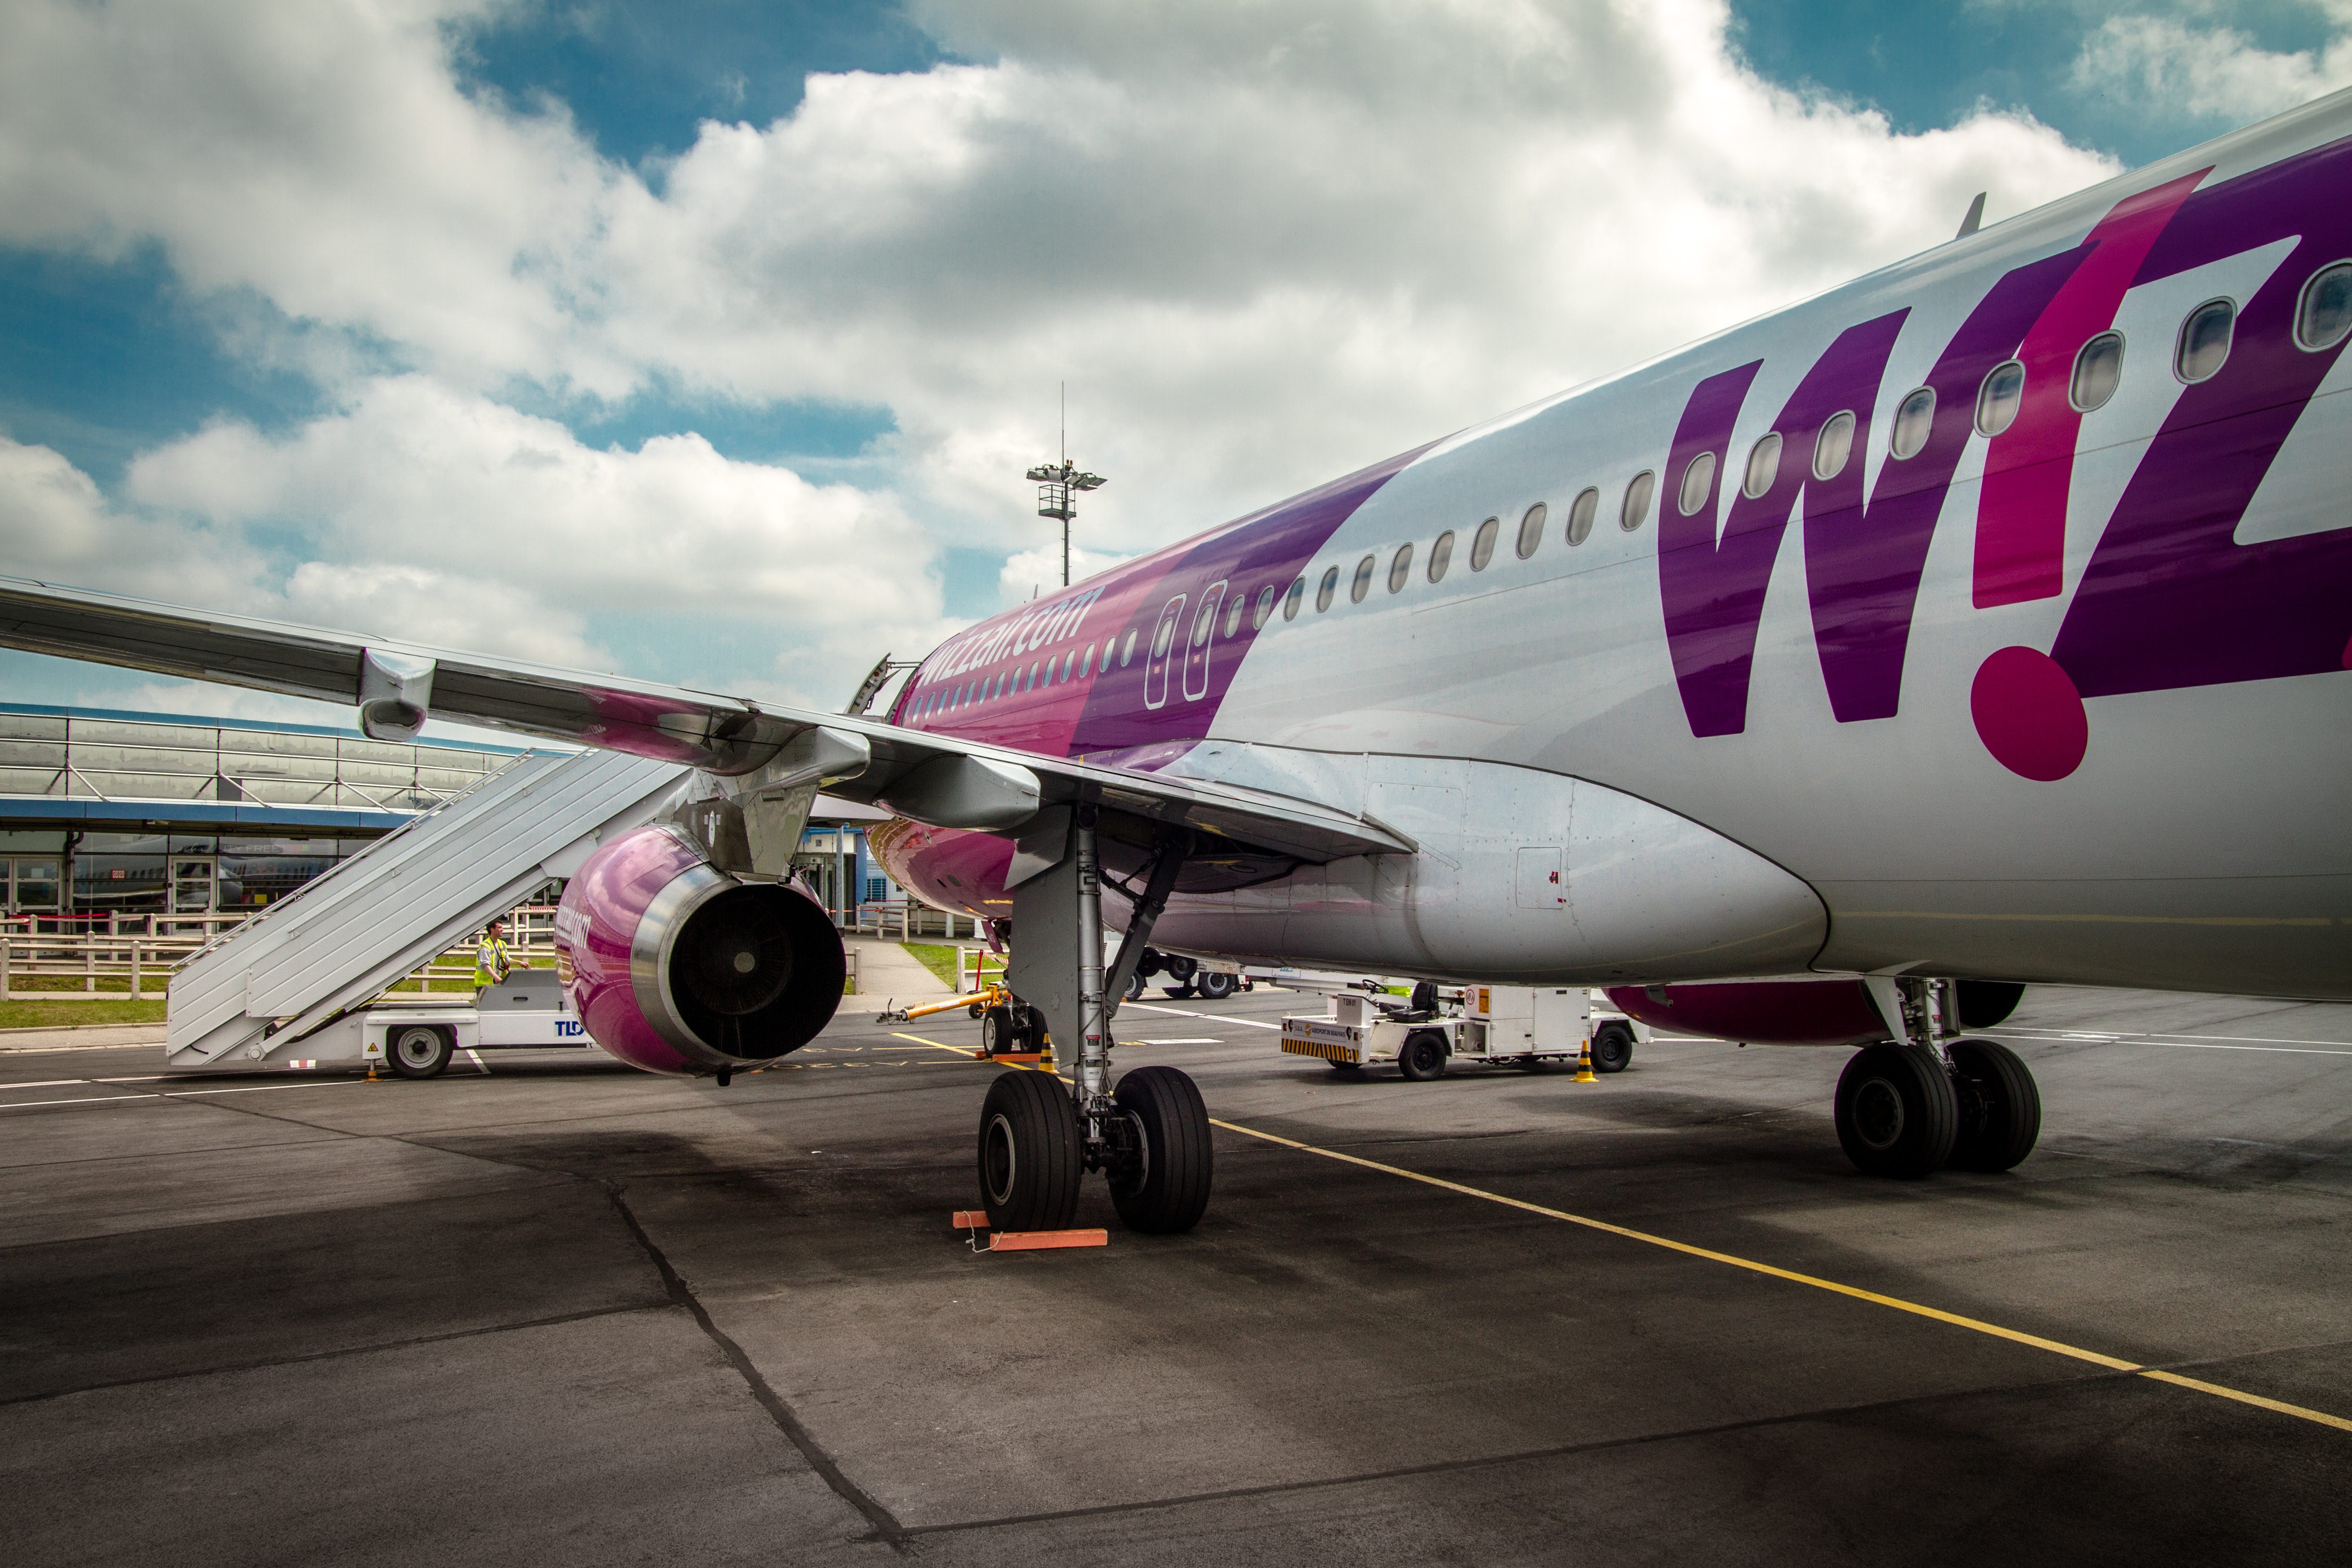 Wizzair Airbus A320 at Beauvais-Tille airport, Airbus, Aircraft, Airlines, Airplane, HQ Photo